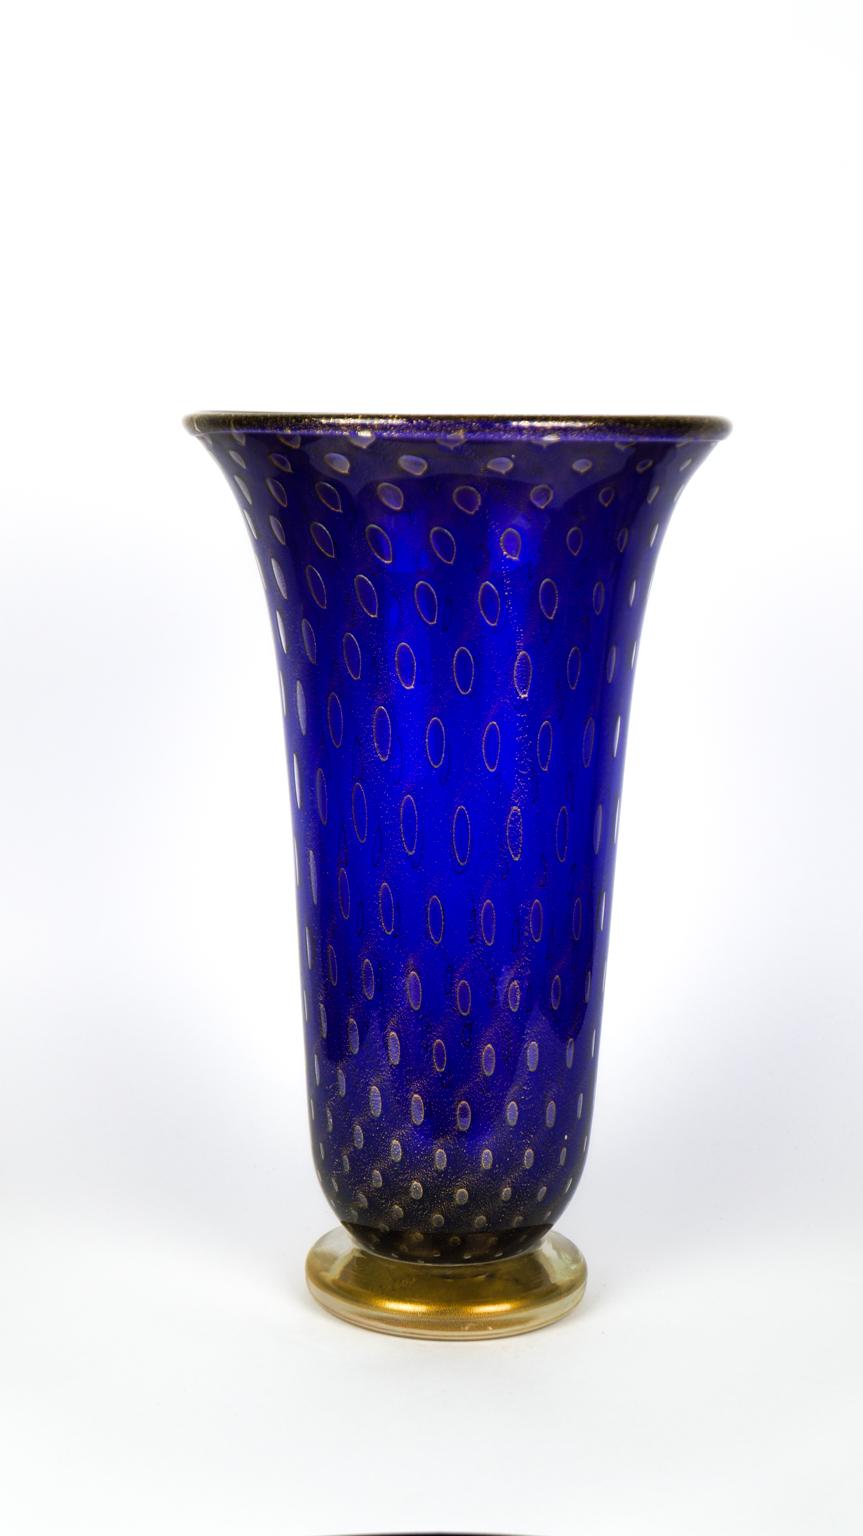 Handmade blue Murano glass vase with 24-karat gold decorations and inner bubbles.
Work performed by Murano artisan Stefano Mattiello. 
Vase signed with cold engraving by artist. 

An original Murano glass vase represents the symbol of an art and